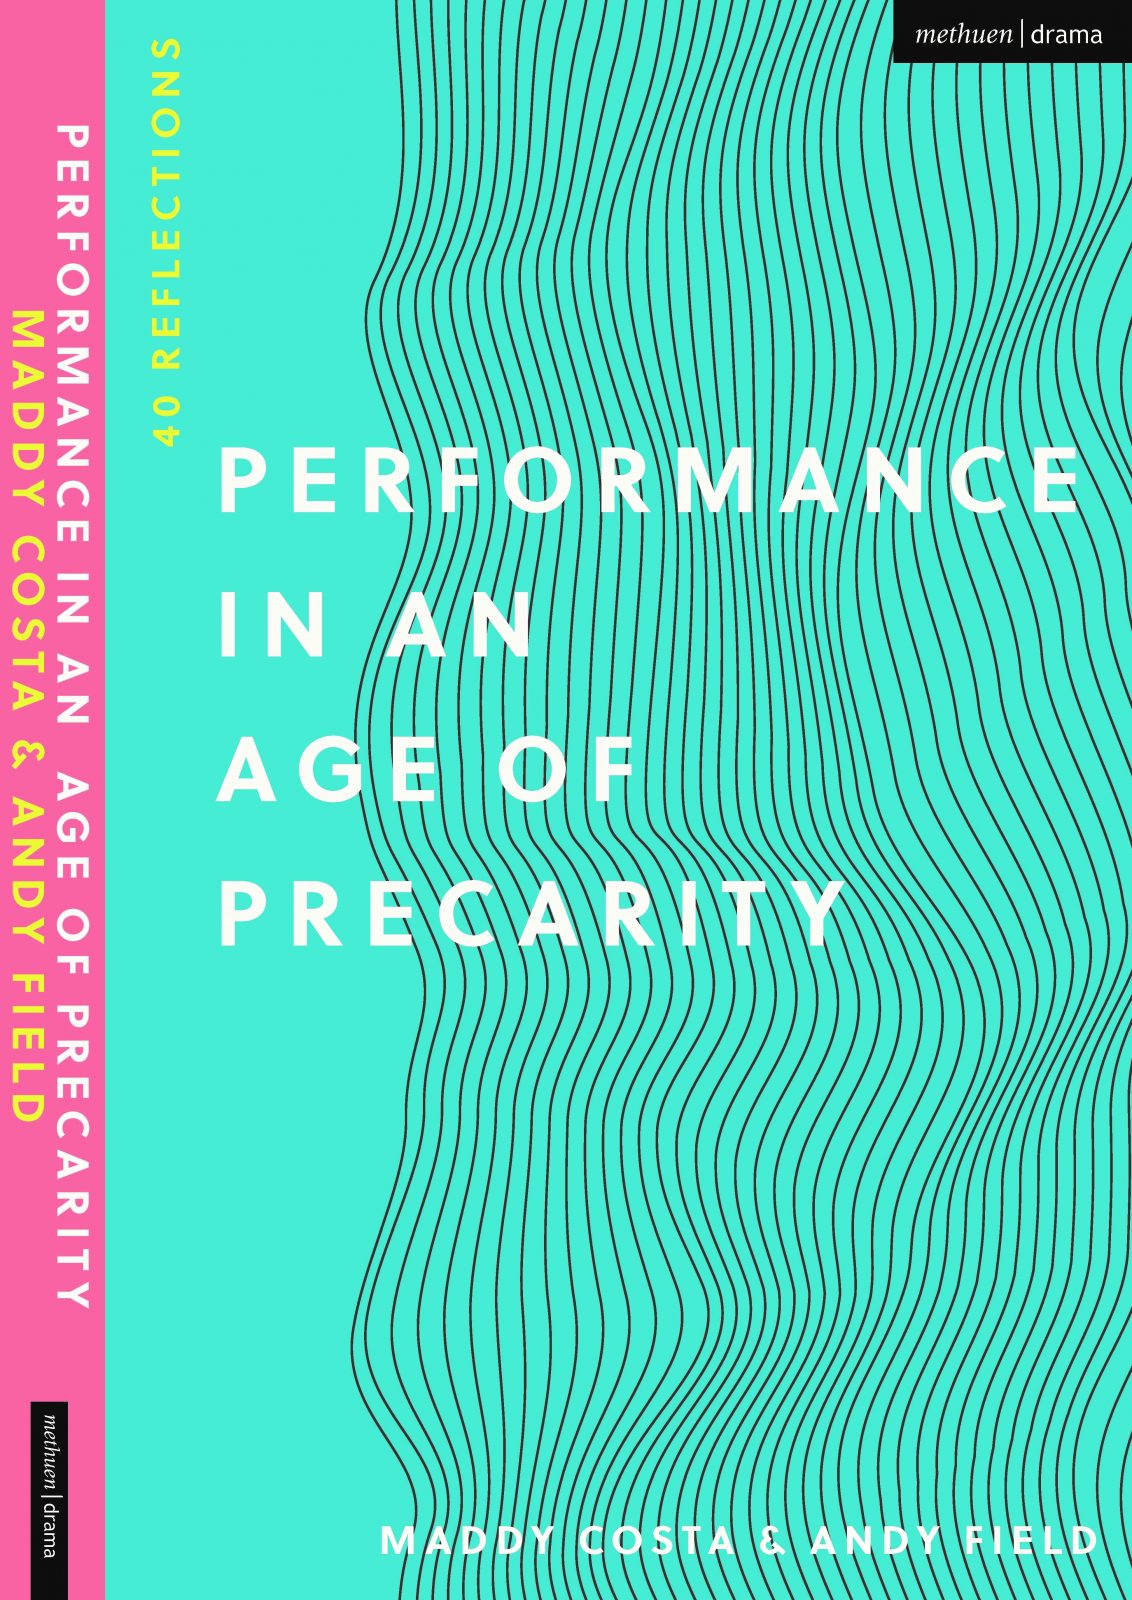 Front cover of the book which reads 'Performance in a n age of precarity'